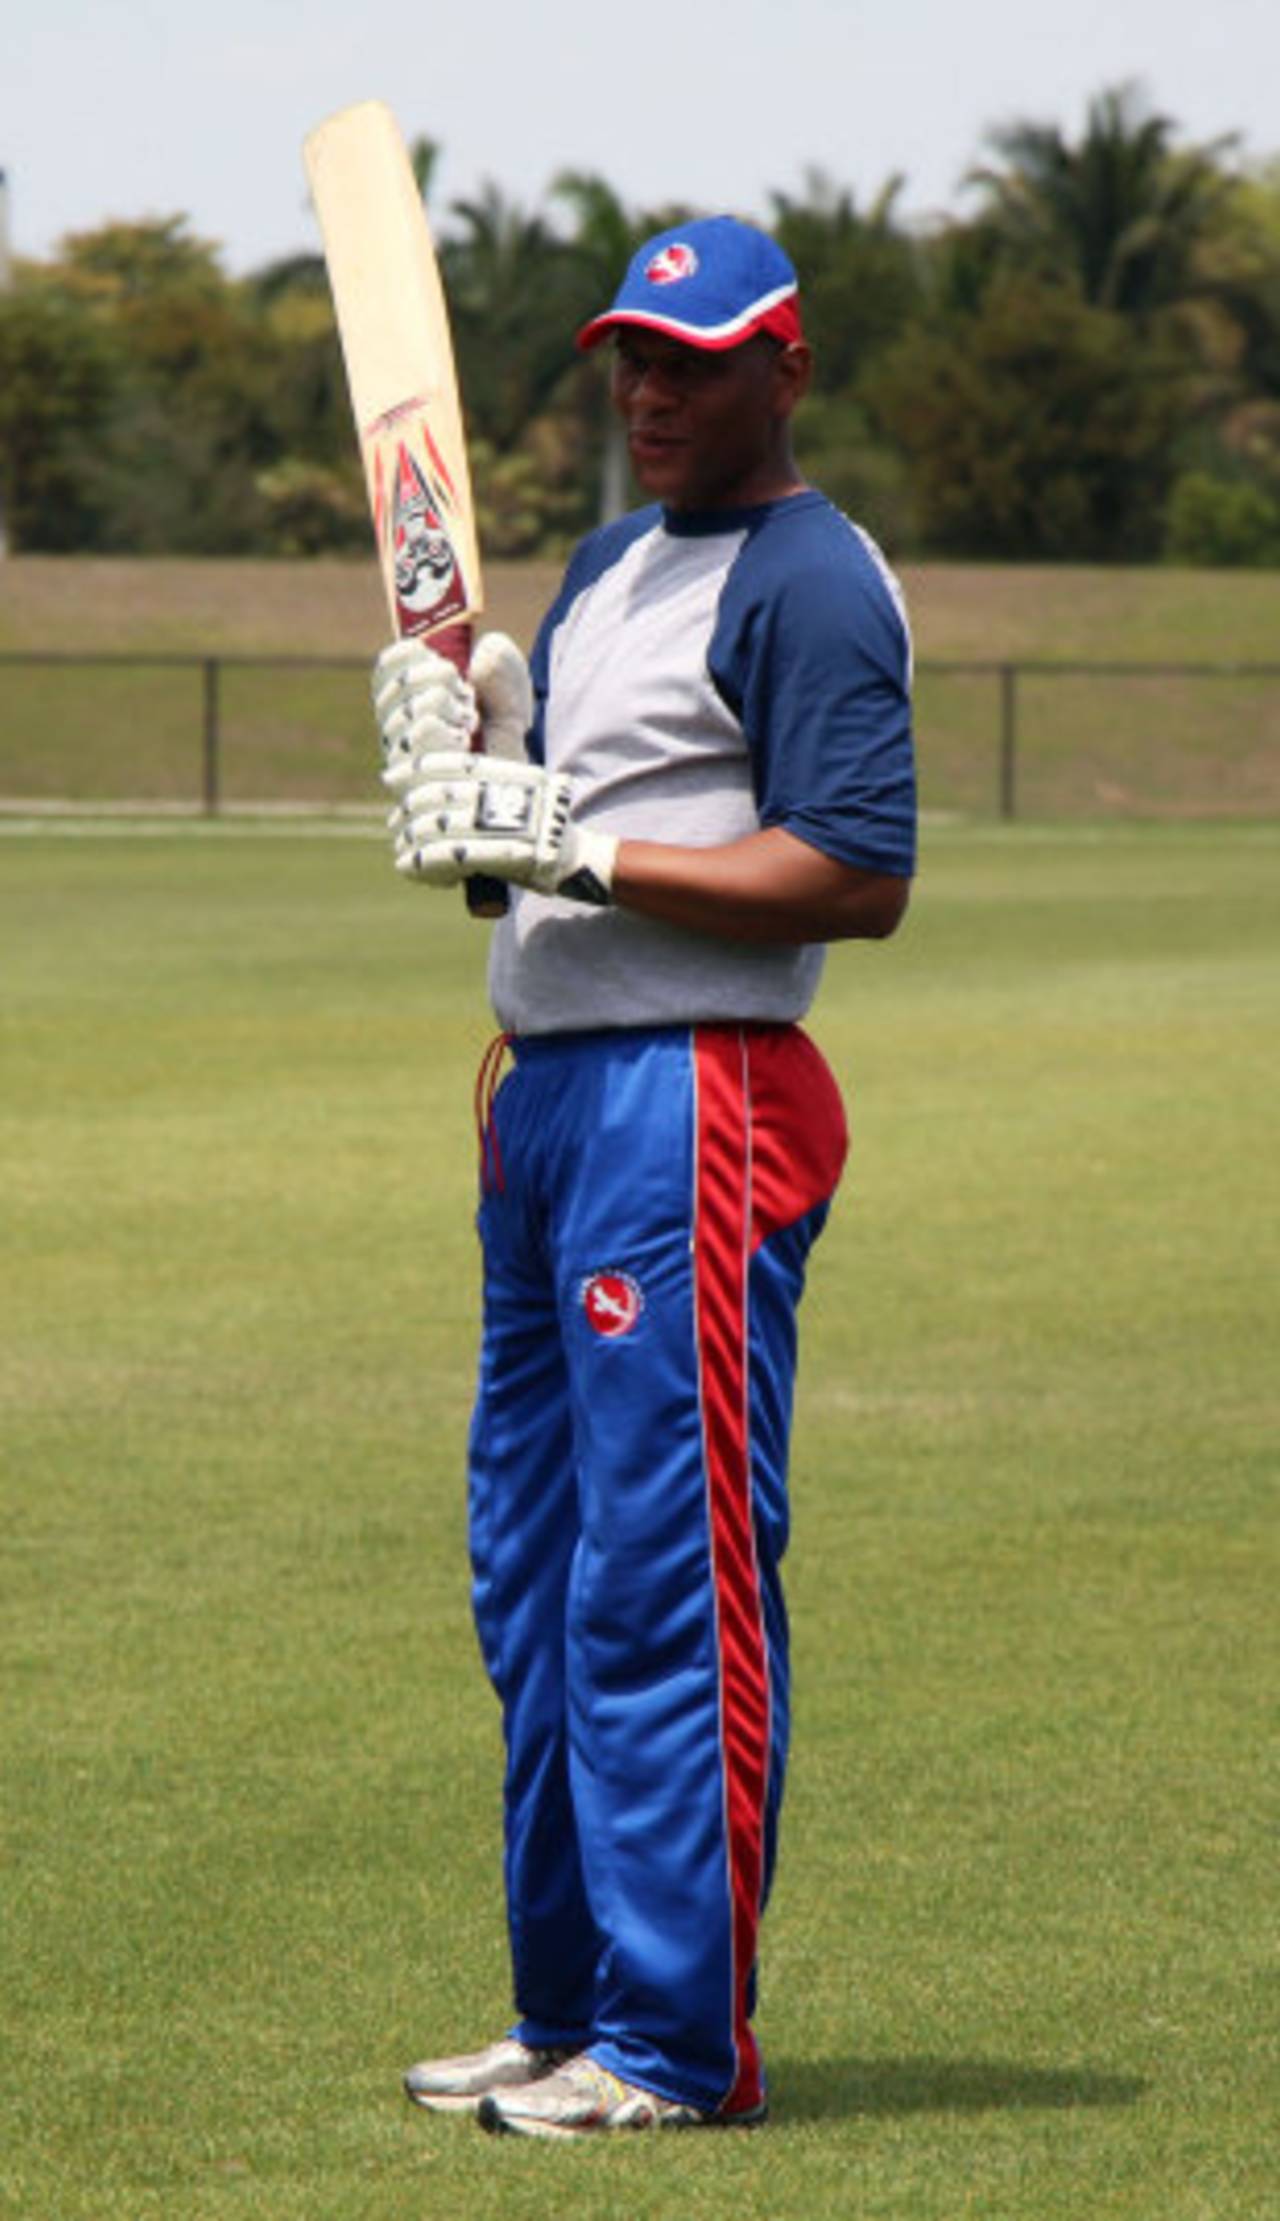 Neil McGarrell prepares to bat during a practice session, November 26, 2013